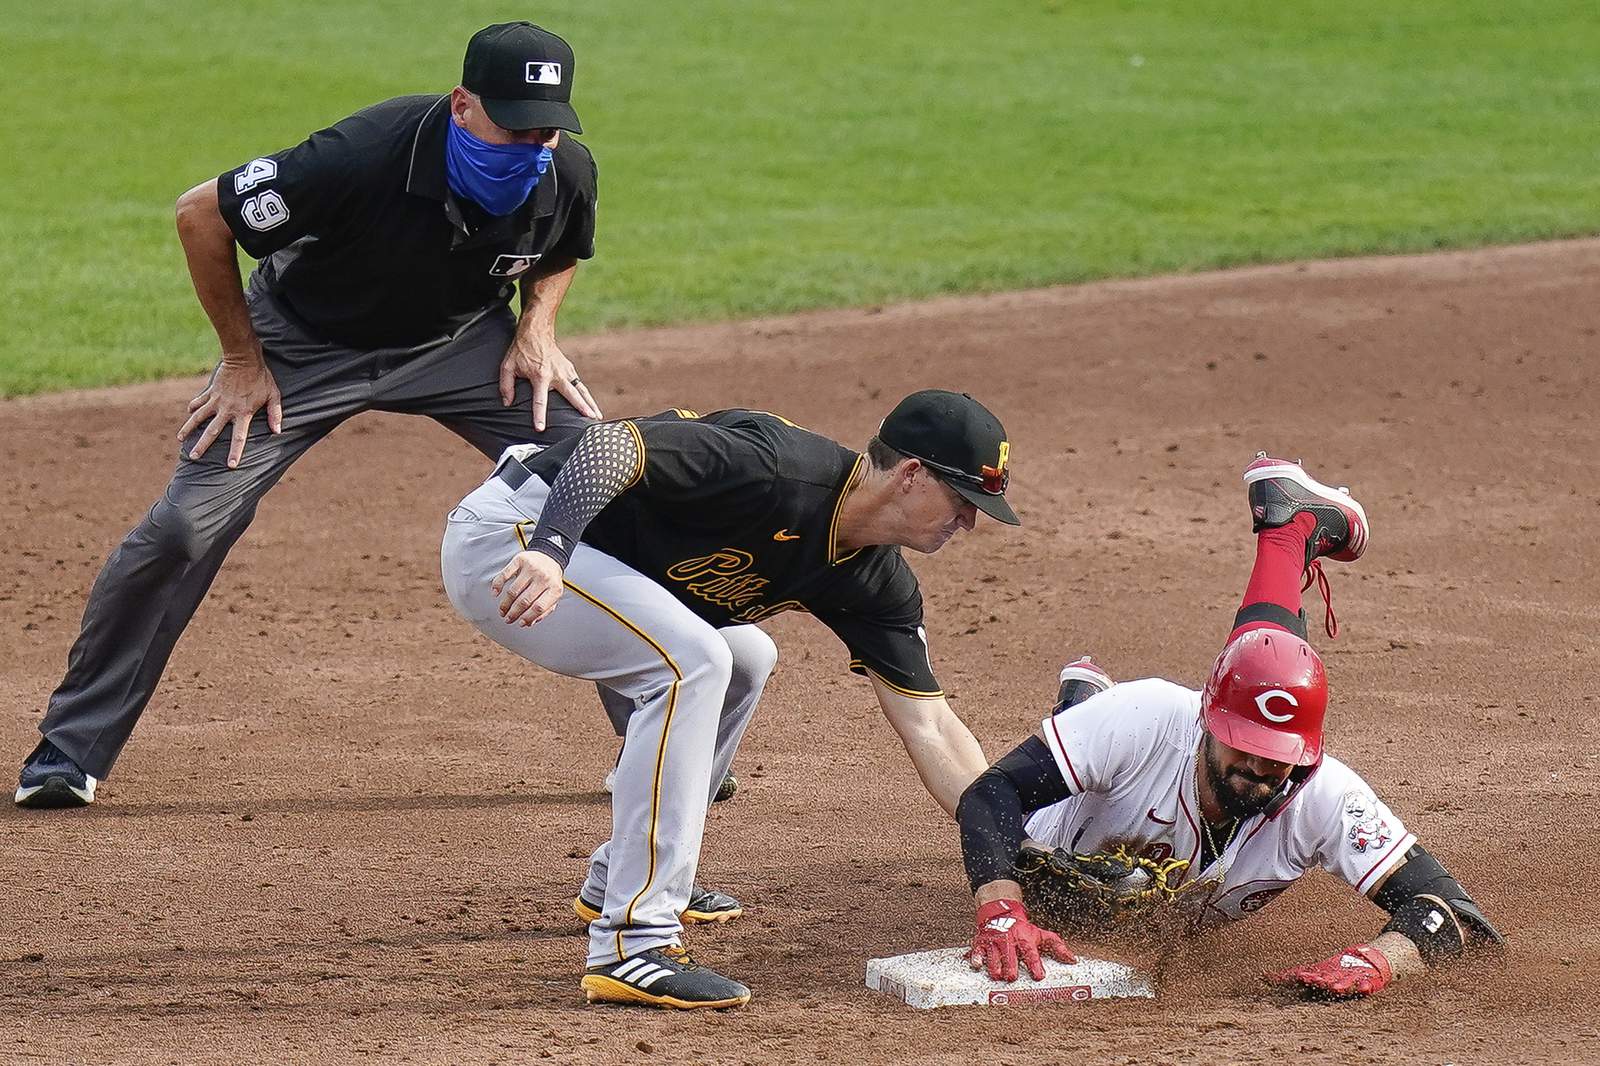 Reds player tests positive, 2 games with Pirates postponed